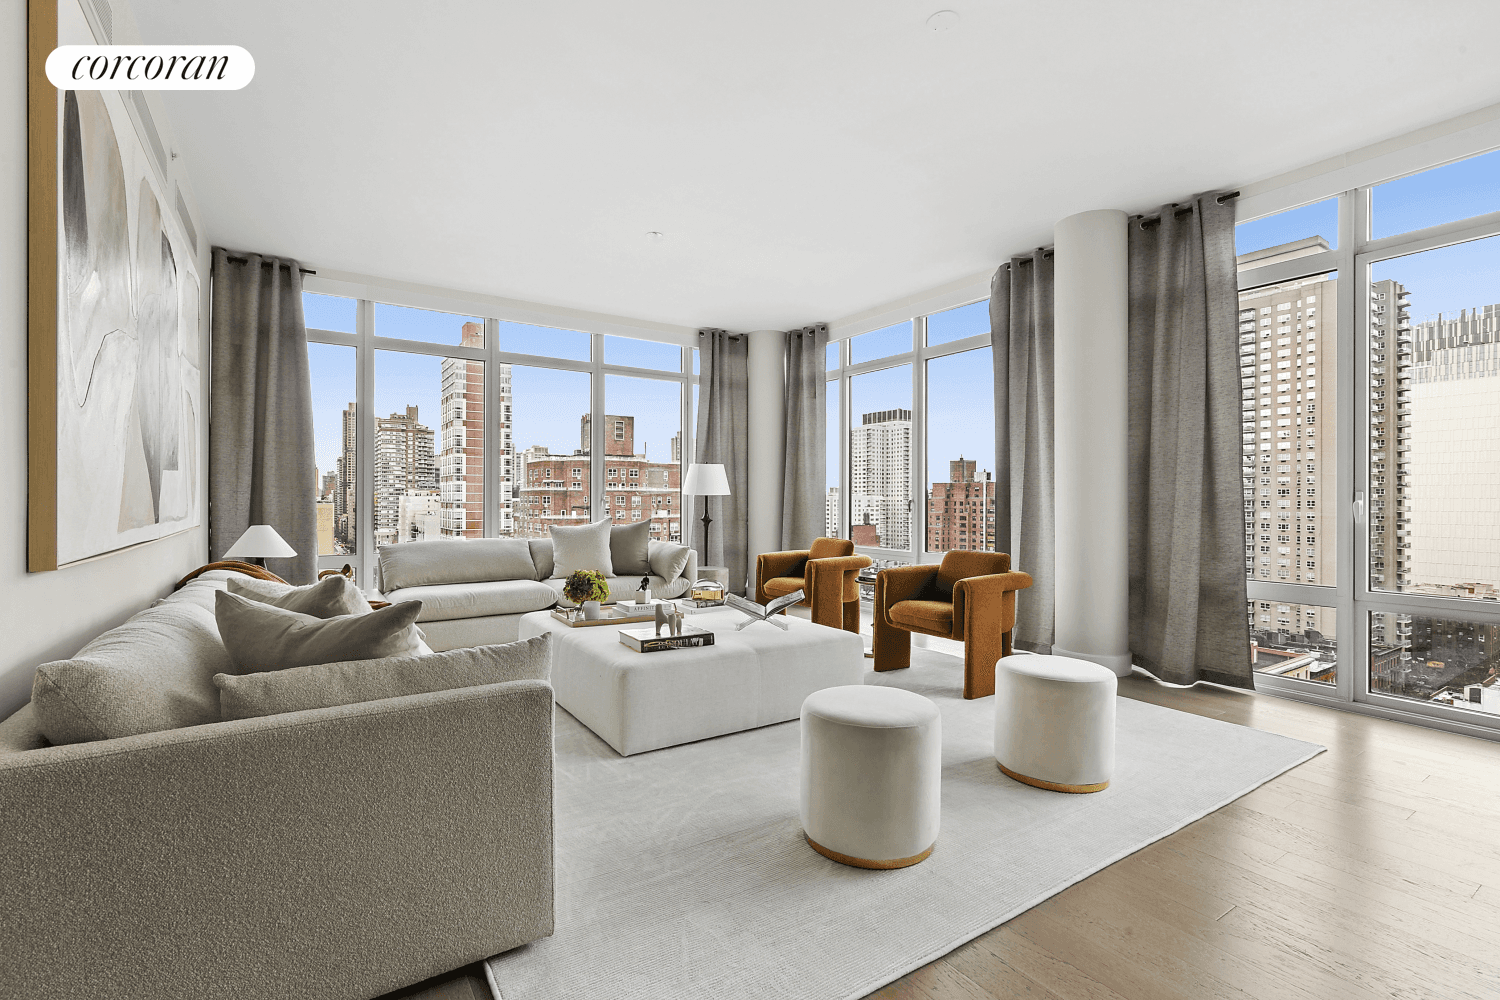 Old world elegance meets contemporary style This luxurious 15th floor residence is a full floor apartment with a private elevator landing and a separate service entrance.